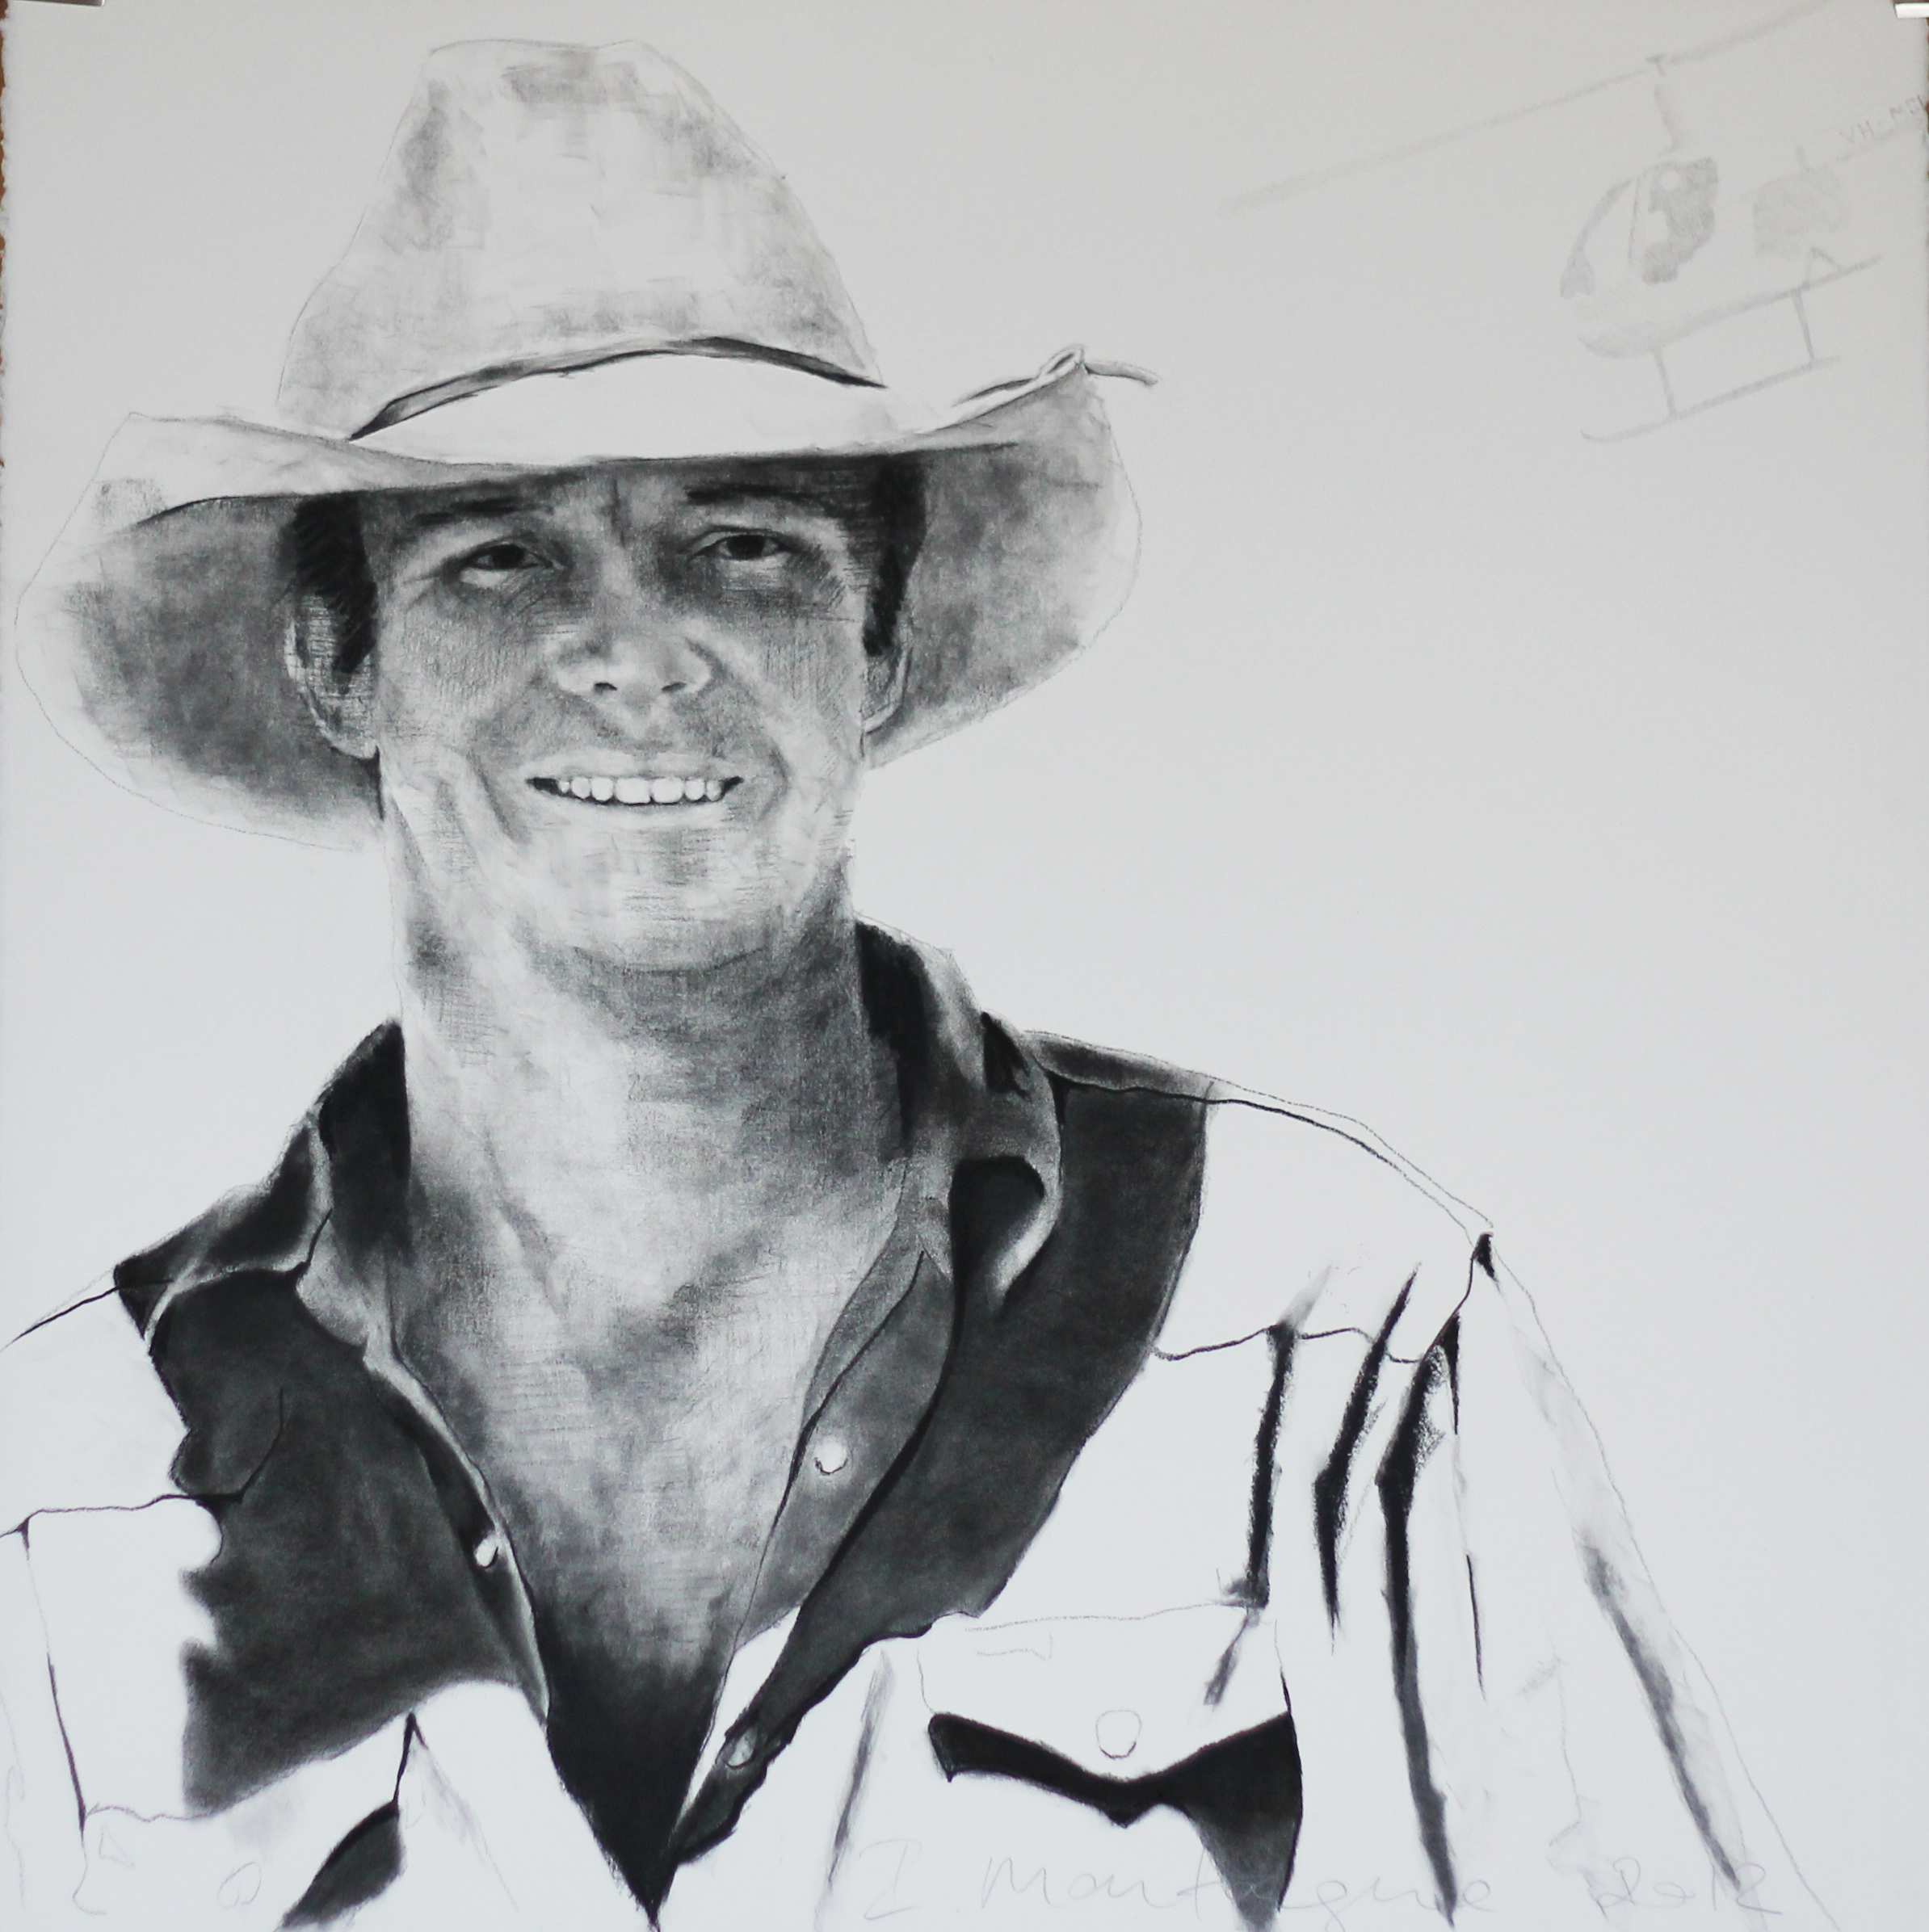    Morgan  . Charcoal on rag paper. 54 x 54cm&nbsp; ©&nbsp; 2012 Ida Montague. Private Collection: Northern Territory  Commissioned Portrait 